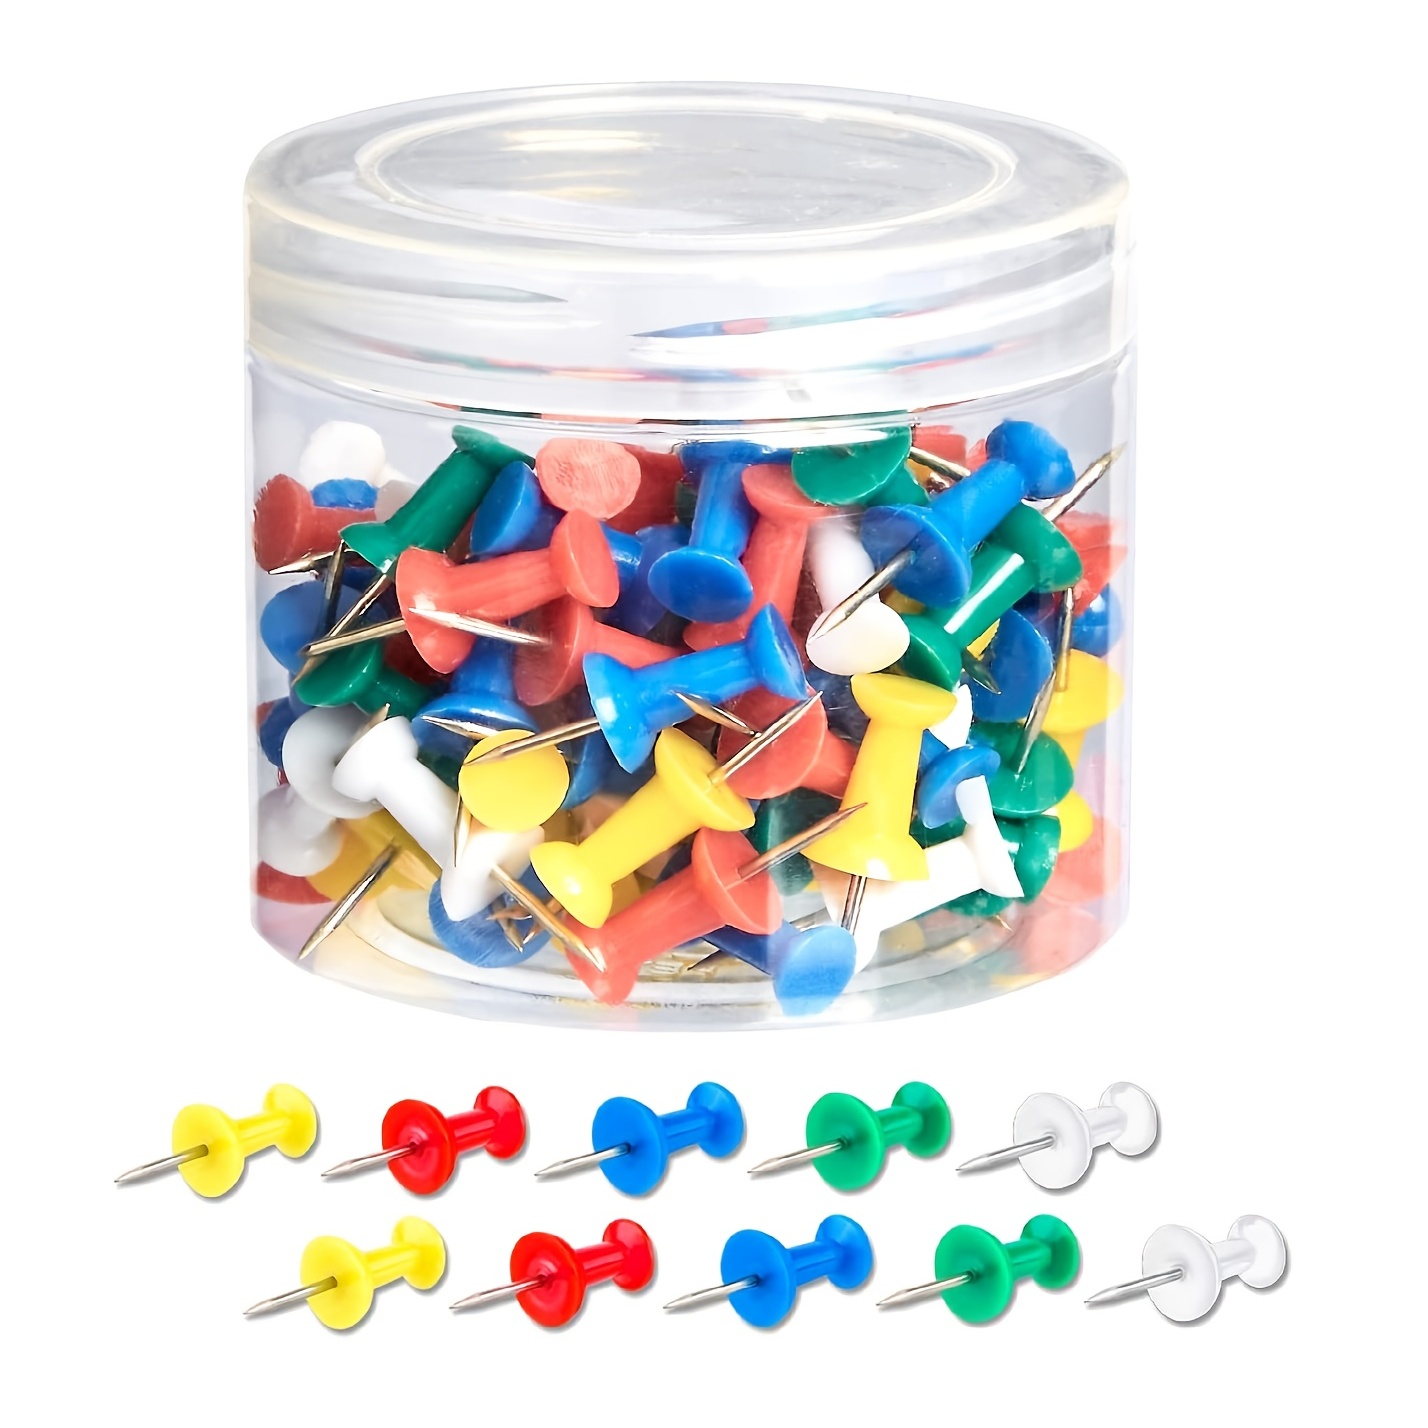 100 Count Push Pins with Steel Point and Plastic Head